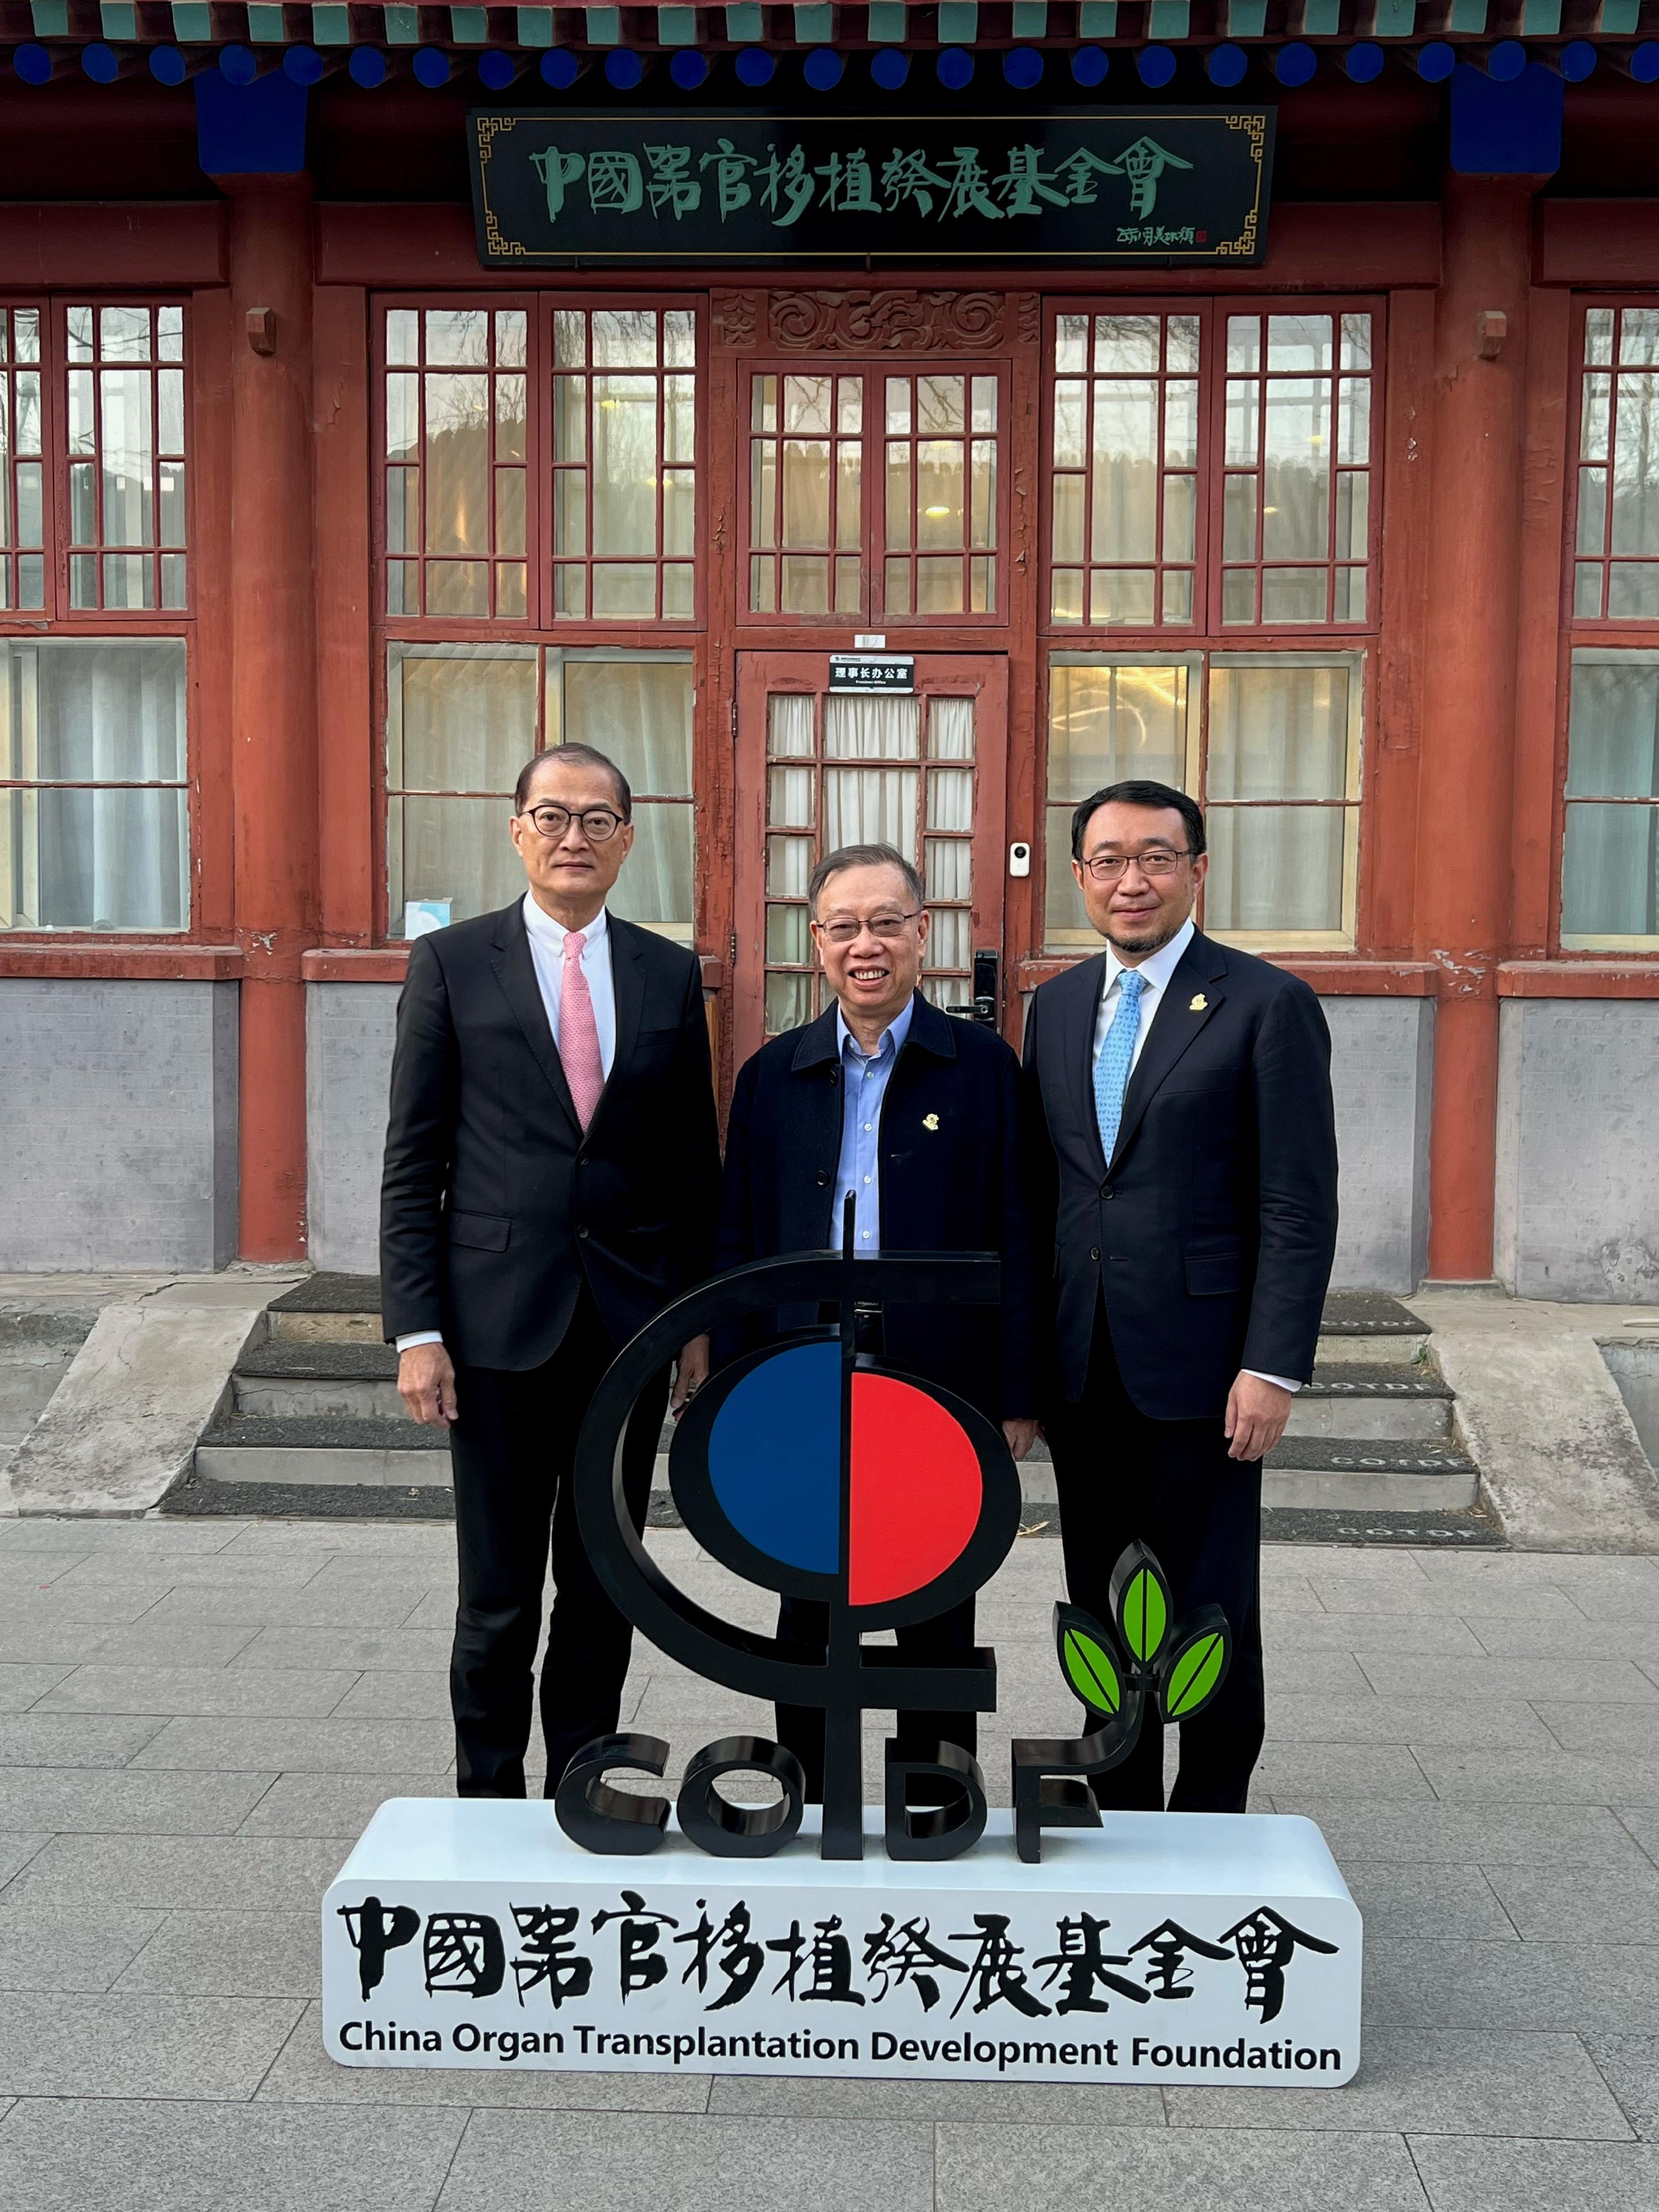 The Secretary for Health, Professor Lo Chung-mau, paid a visit to the China Organ Transplantation Development Foundation (COTDF) in Beijing this evening (March 15). Photo shows (from left) Professor Lo; the Chairman of the expert committee of the COTDF and the Chairman of the China National Organ Donation and Transplantation Committee, Professor Huang Jiefu; and the Deputy Board of Directors of the COTDF and the Director of China Organ Transplant Response System, Mr Wang Haibo.